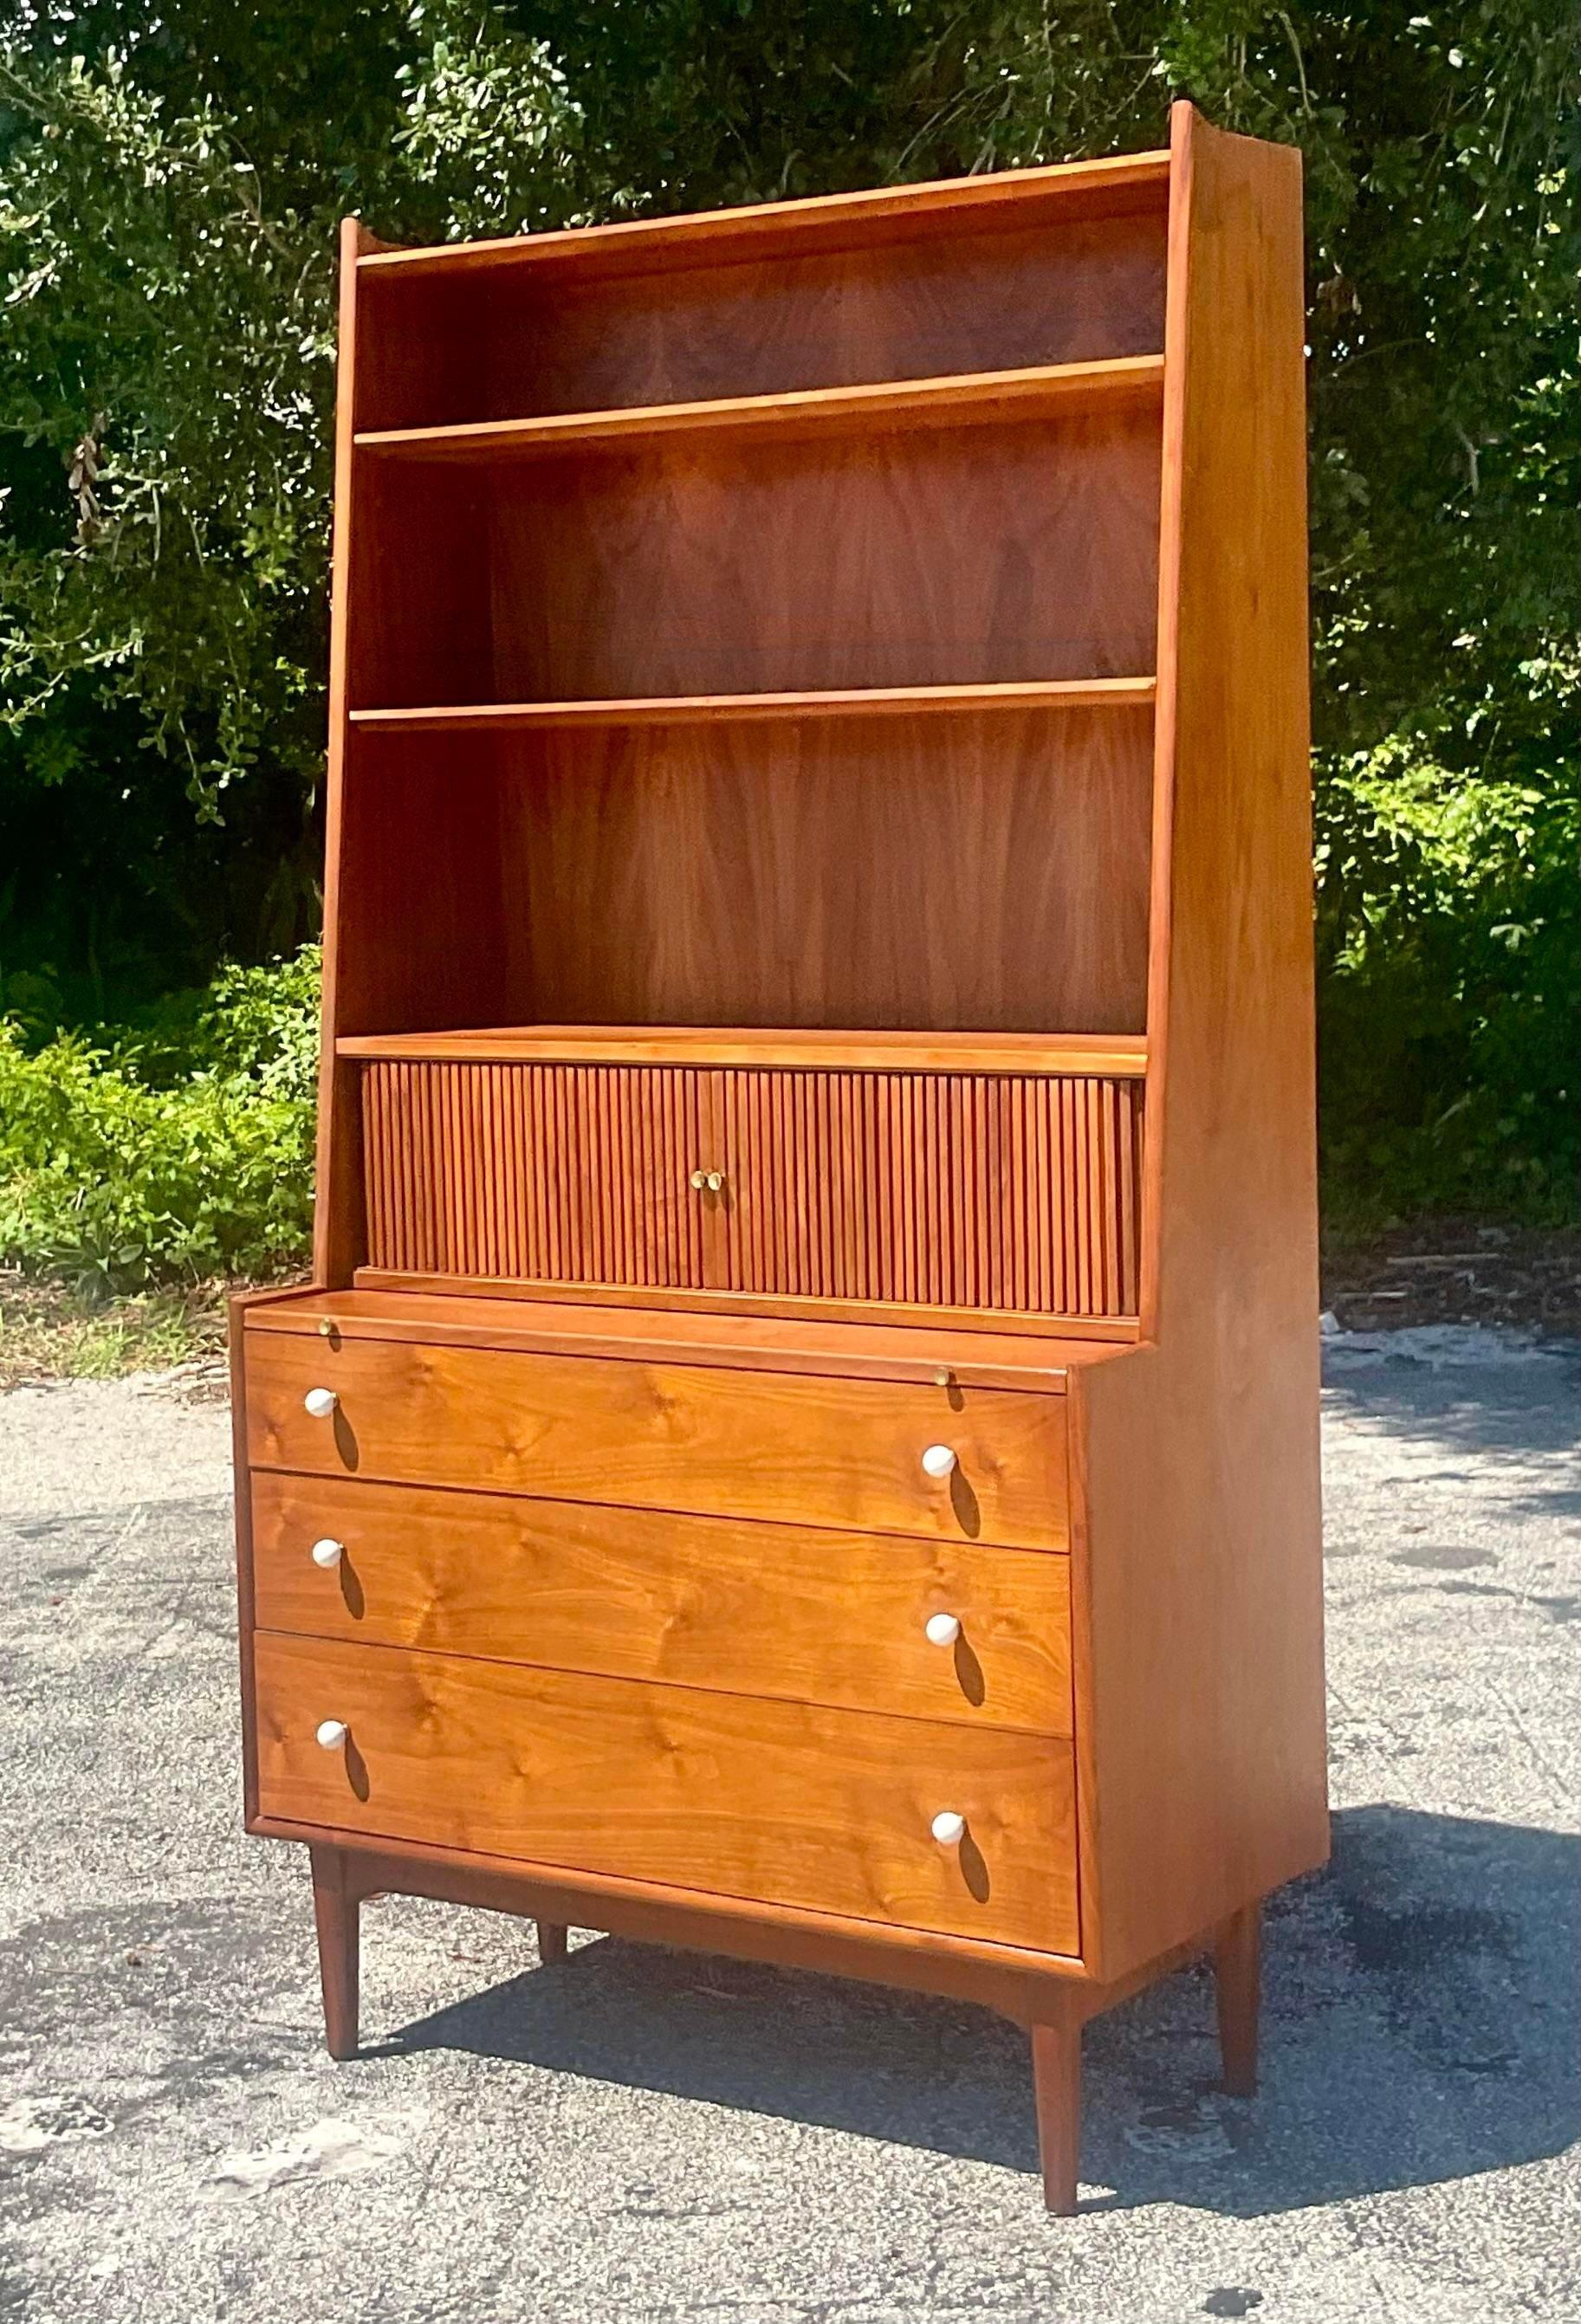 A fabulous vintage MCM secretary desk. Made by the iconic Drexel group and marked inside the drawer. A chic and streamlined design with a tapered upper cabinet. Sliding tam or doors reveal lots of great storage and flip top surface open for a desk.